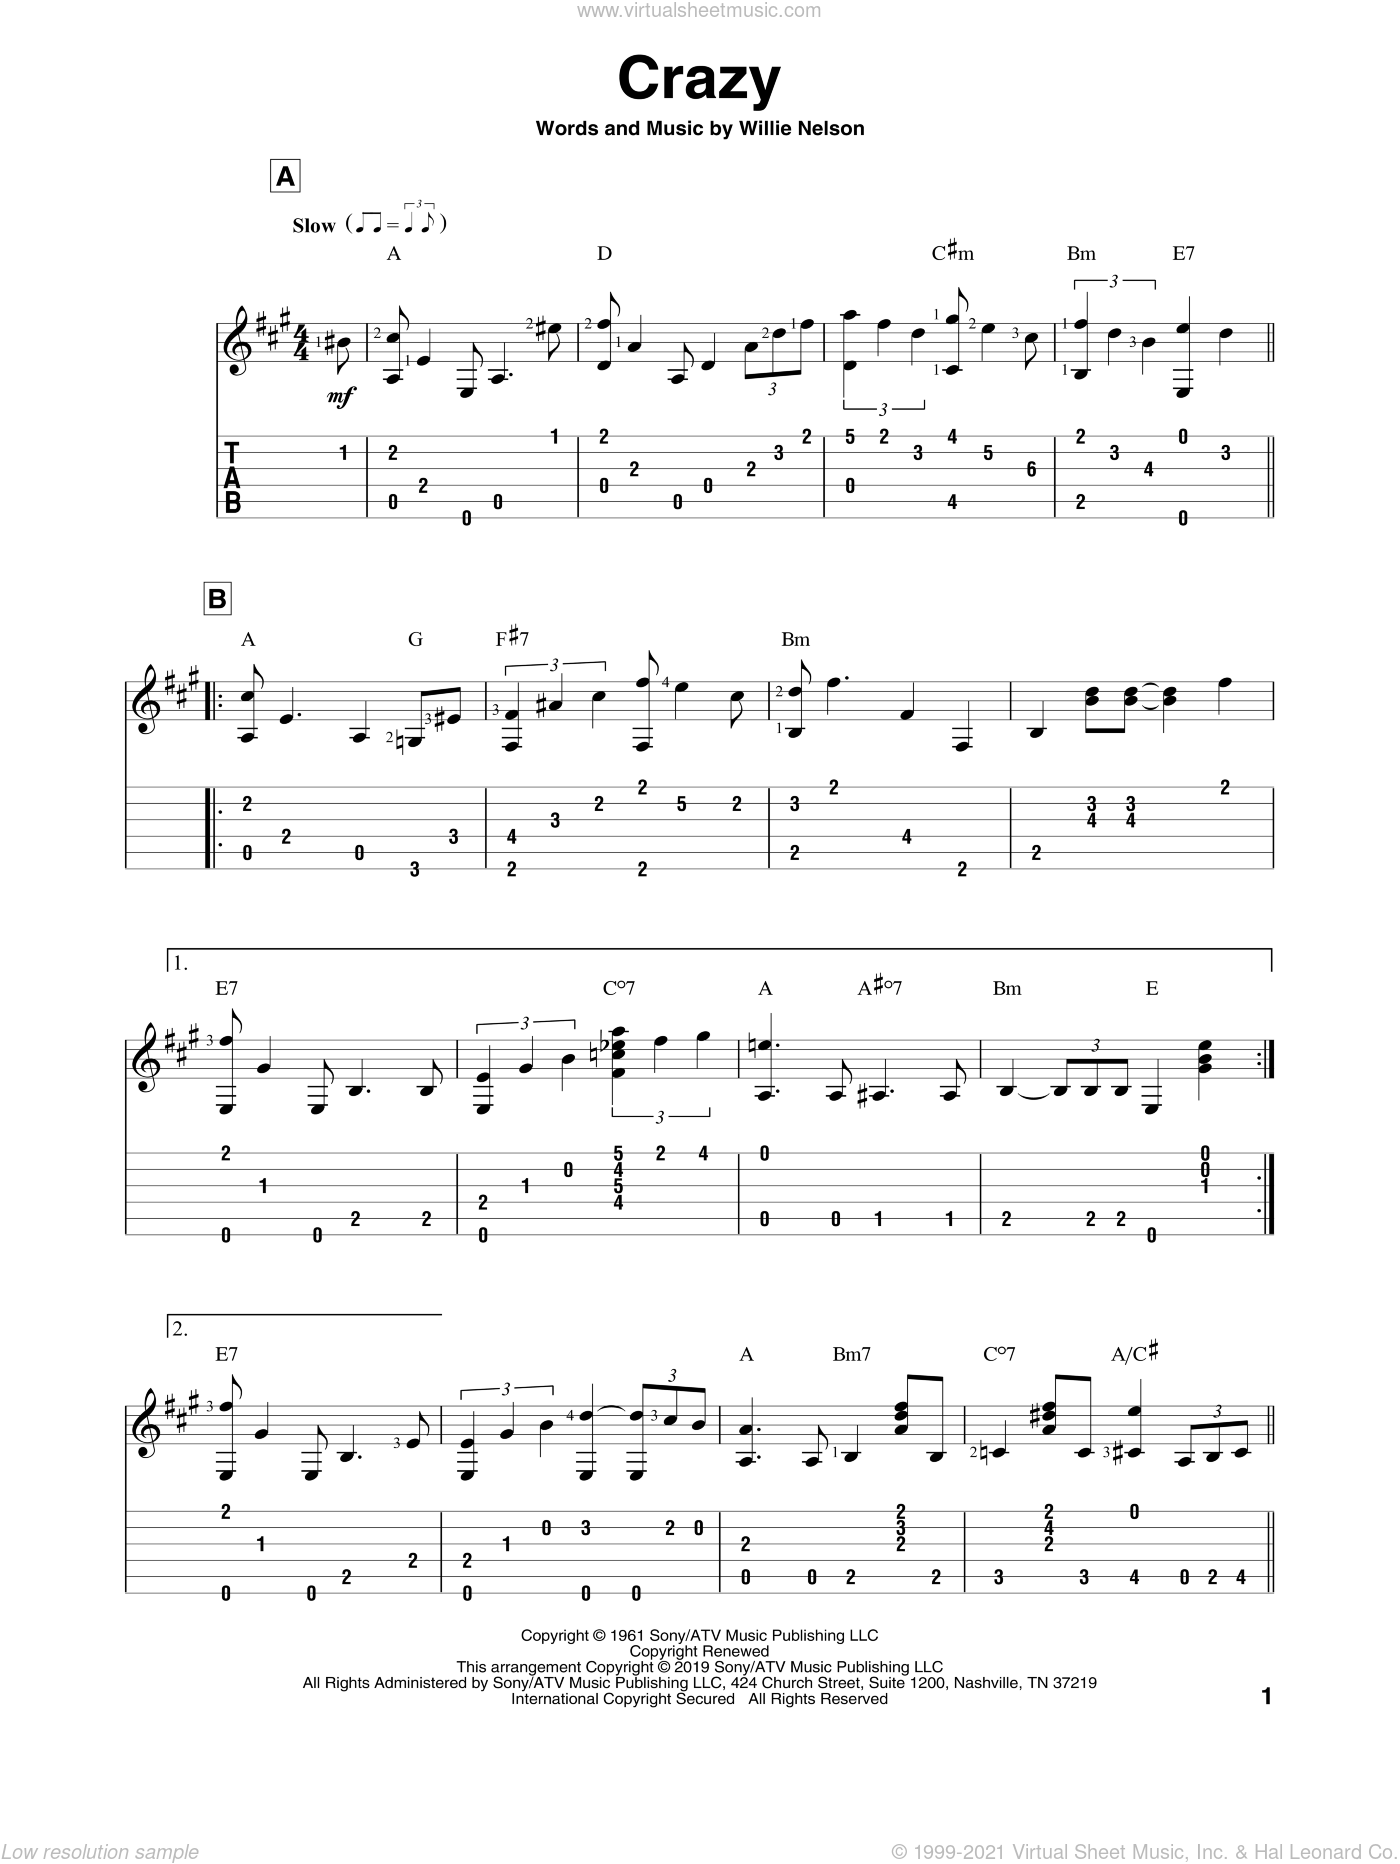 Cline Crazy Sheet Music Intermediate For Guitar Solo Pdf G crazy dreams linger on, d as i face an empty dawn, a with no end to it all, can i see, g for i've surely reached the end, d lost your love to a friend cline crazy sheet music intermediate for guitar solo pdf